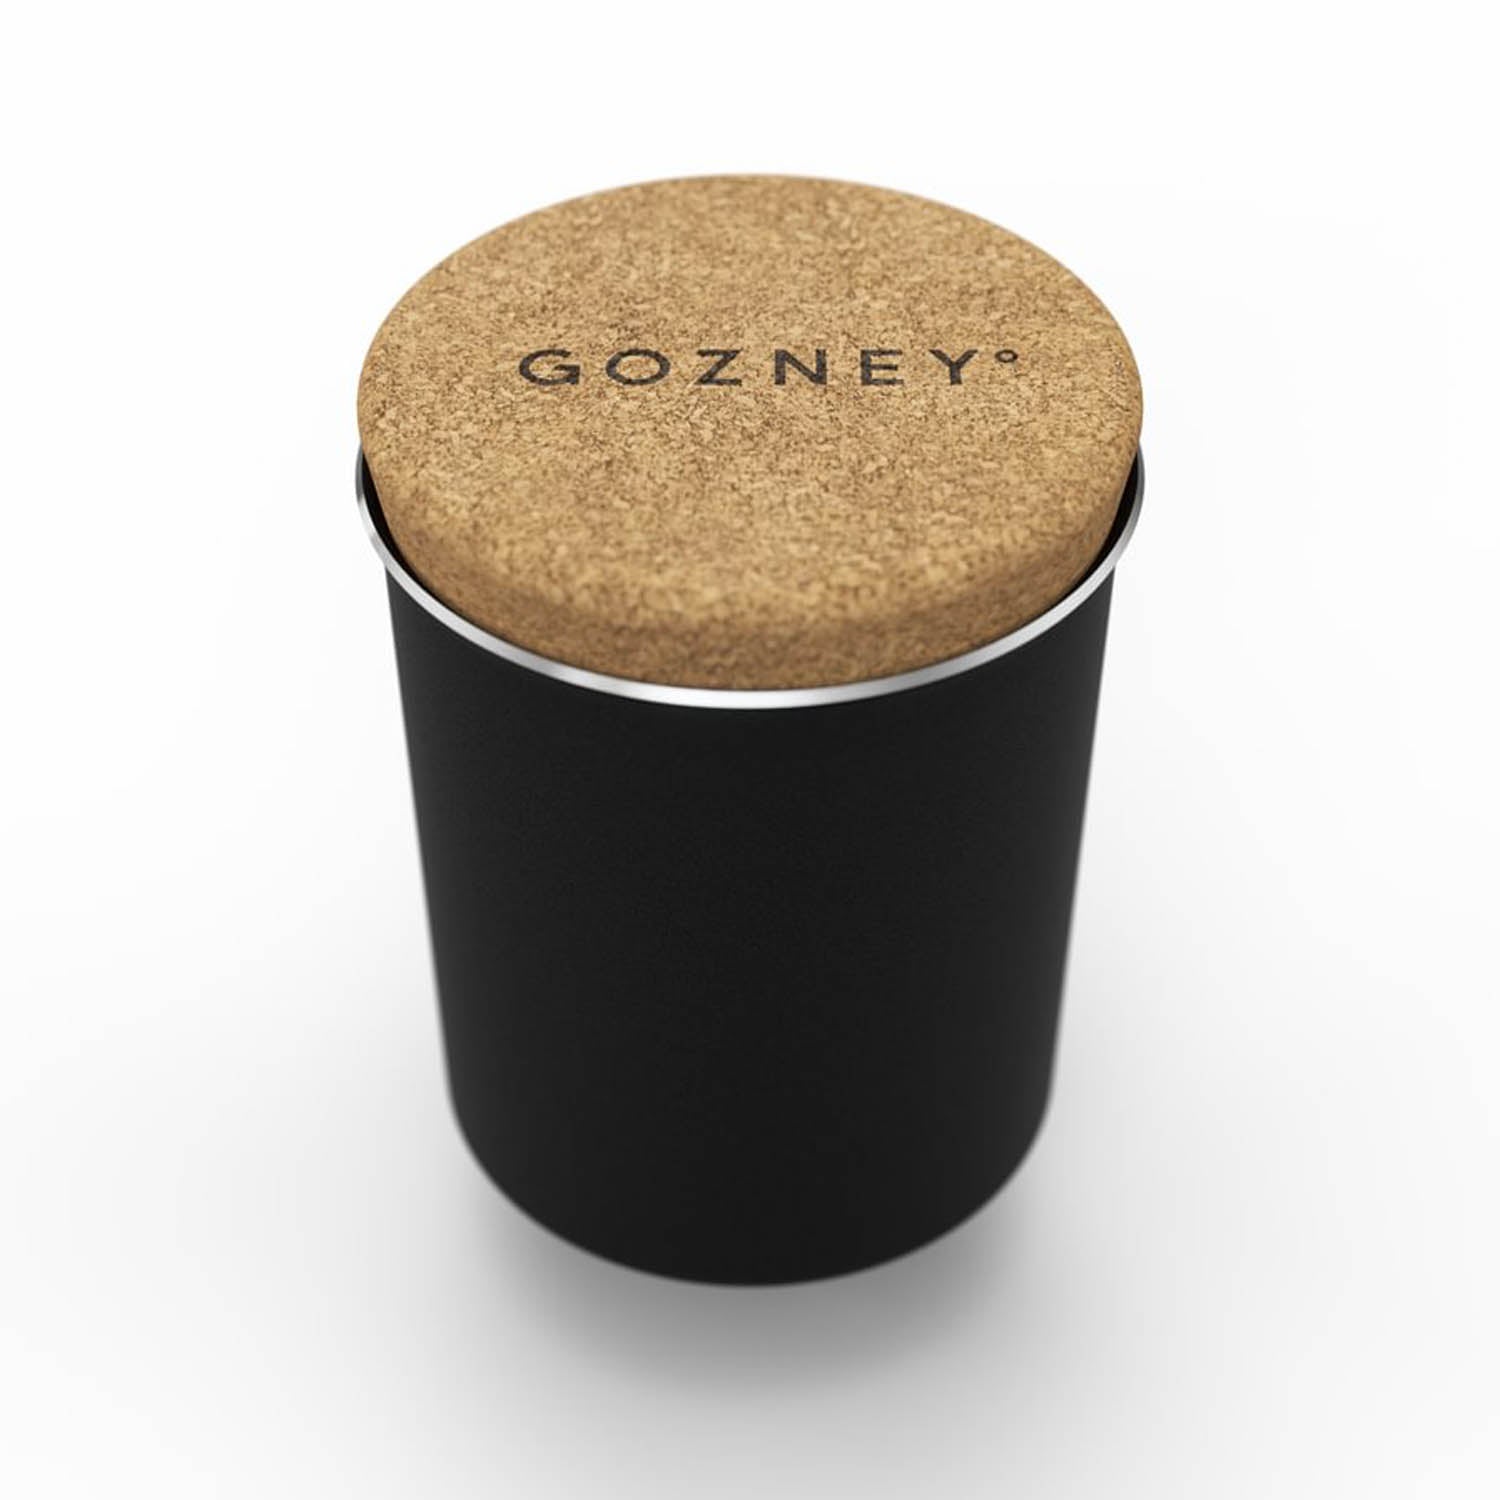 Gozney Dome Steam Injector Black Made Releases Perfect Amount Of Water For Steam